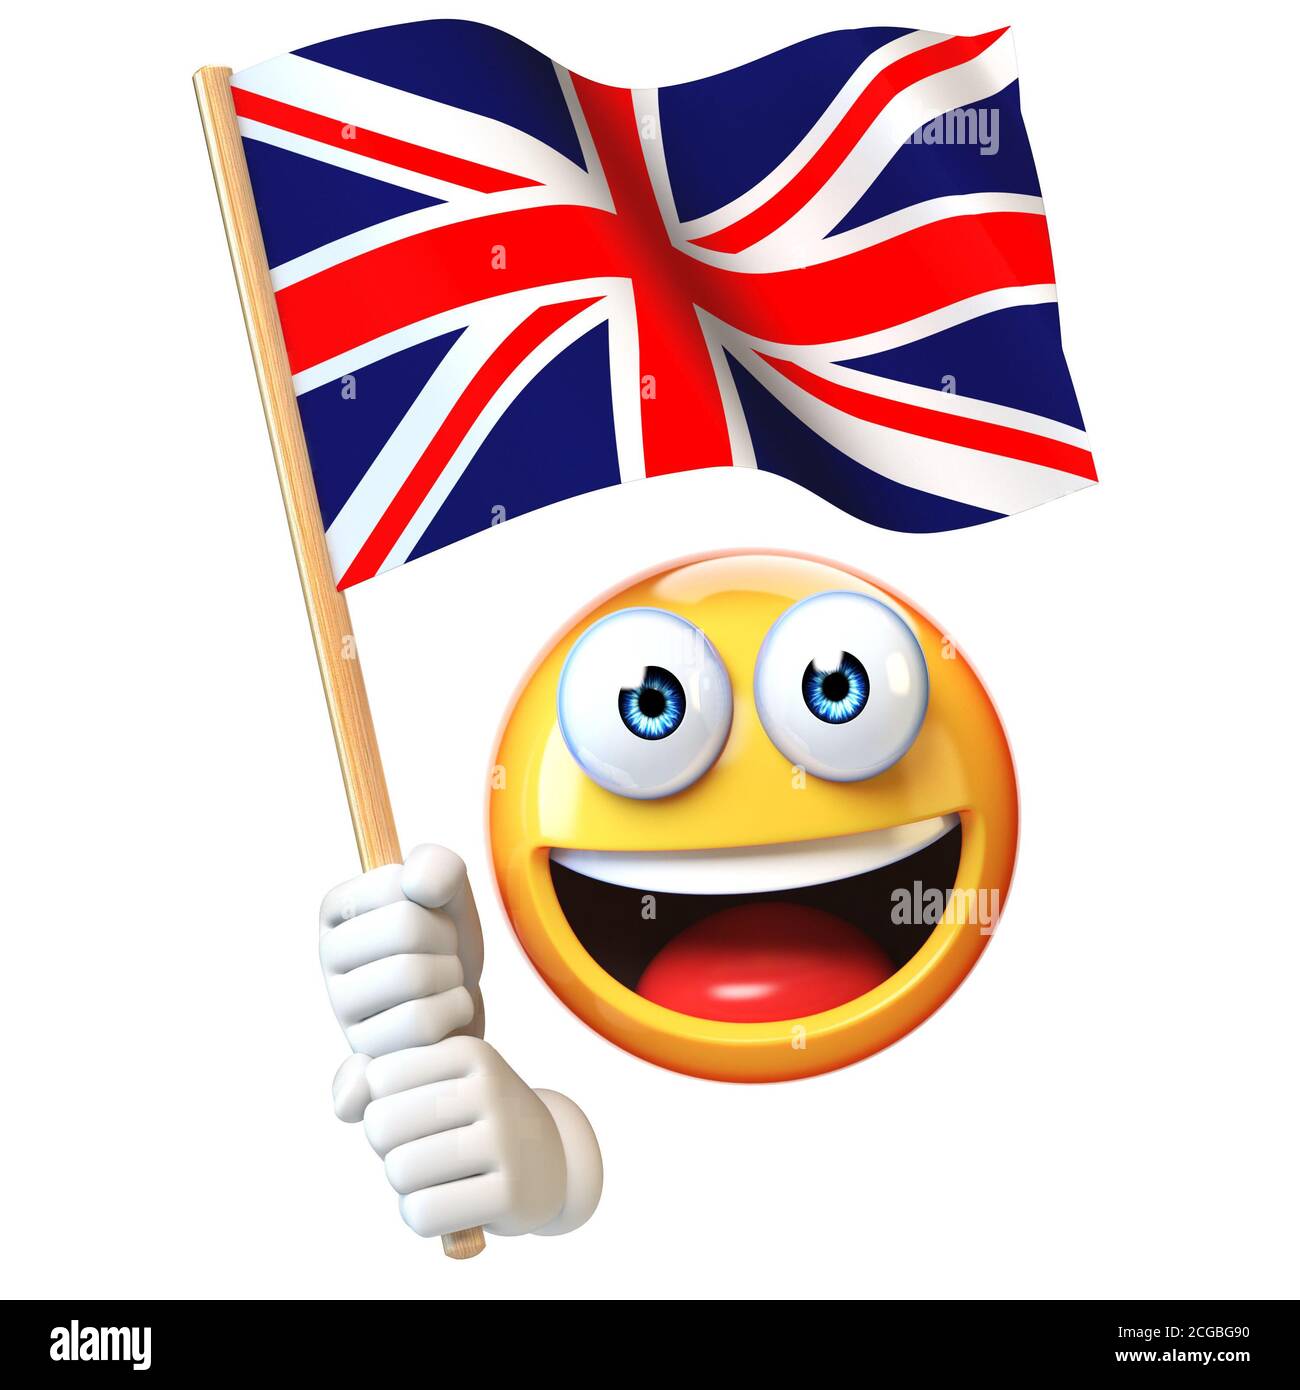 Football fan celebrating uk Cut Out Stock Images & Pictures - Alamy